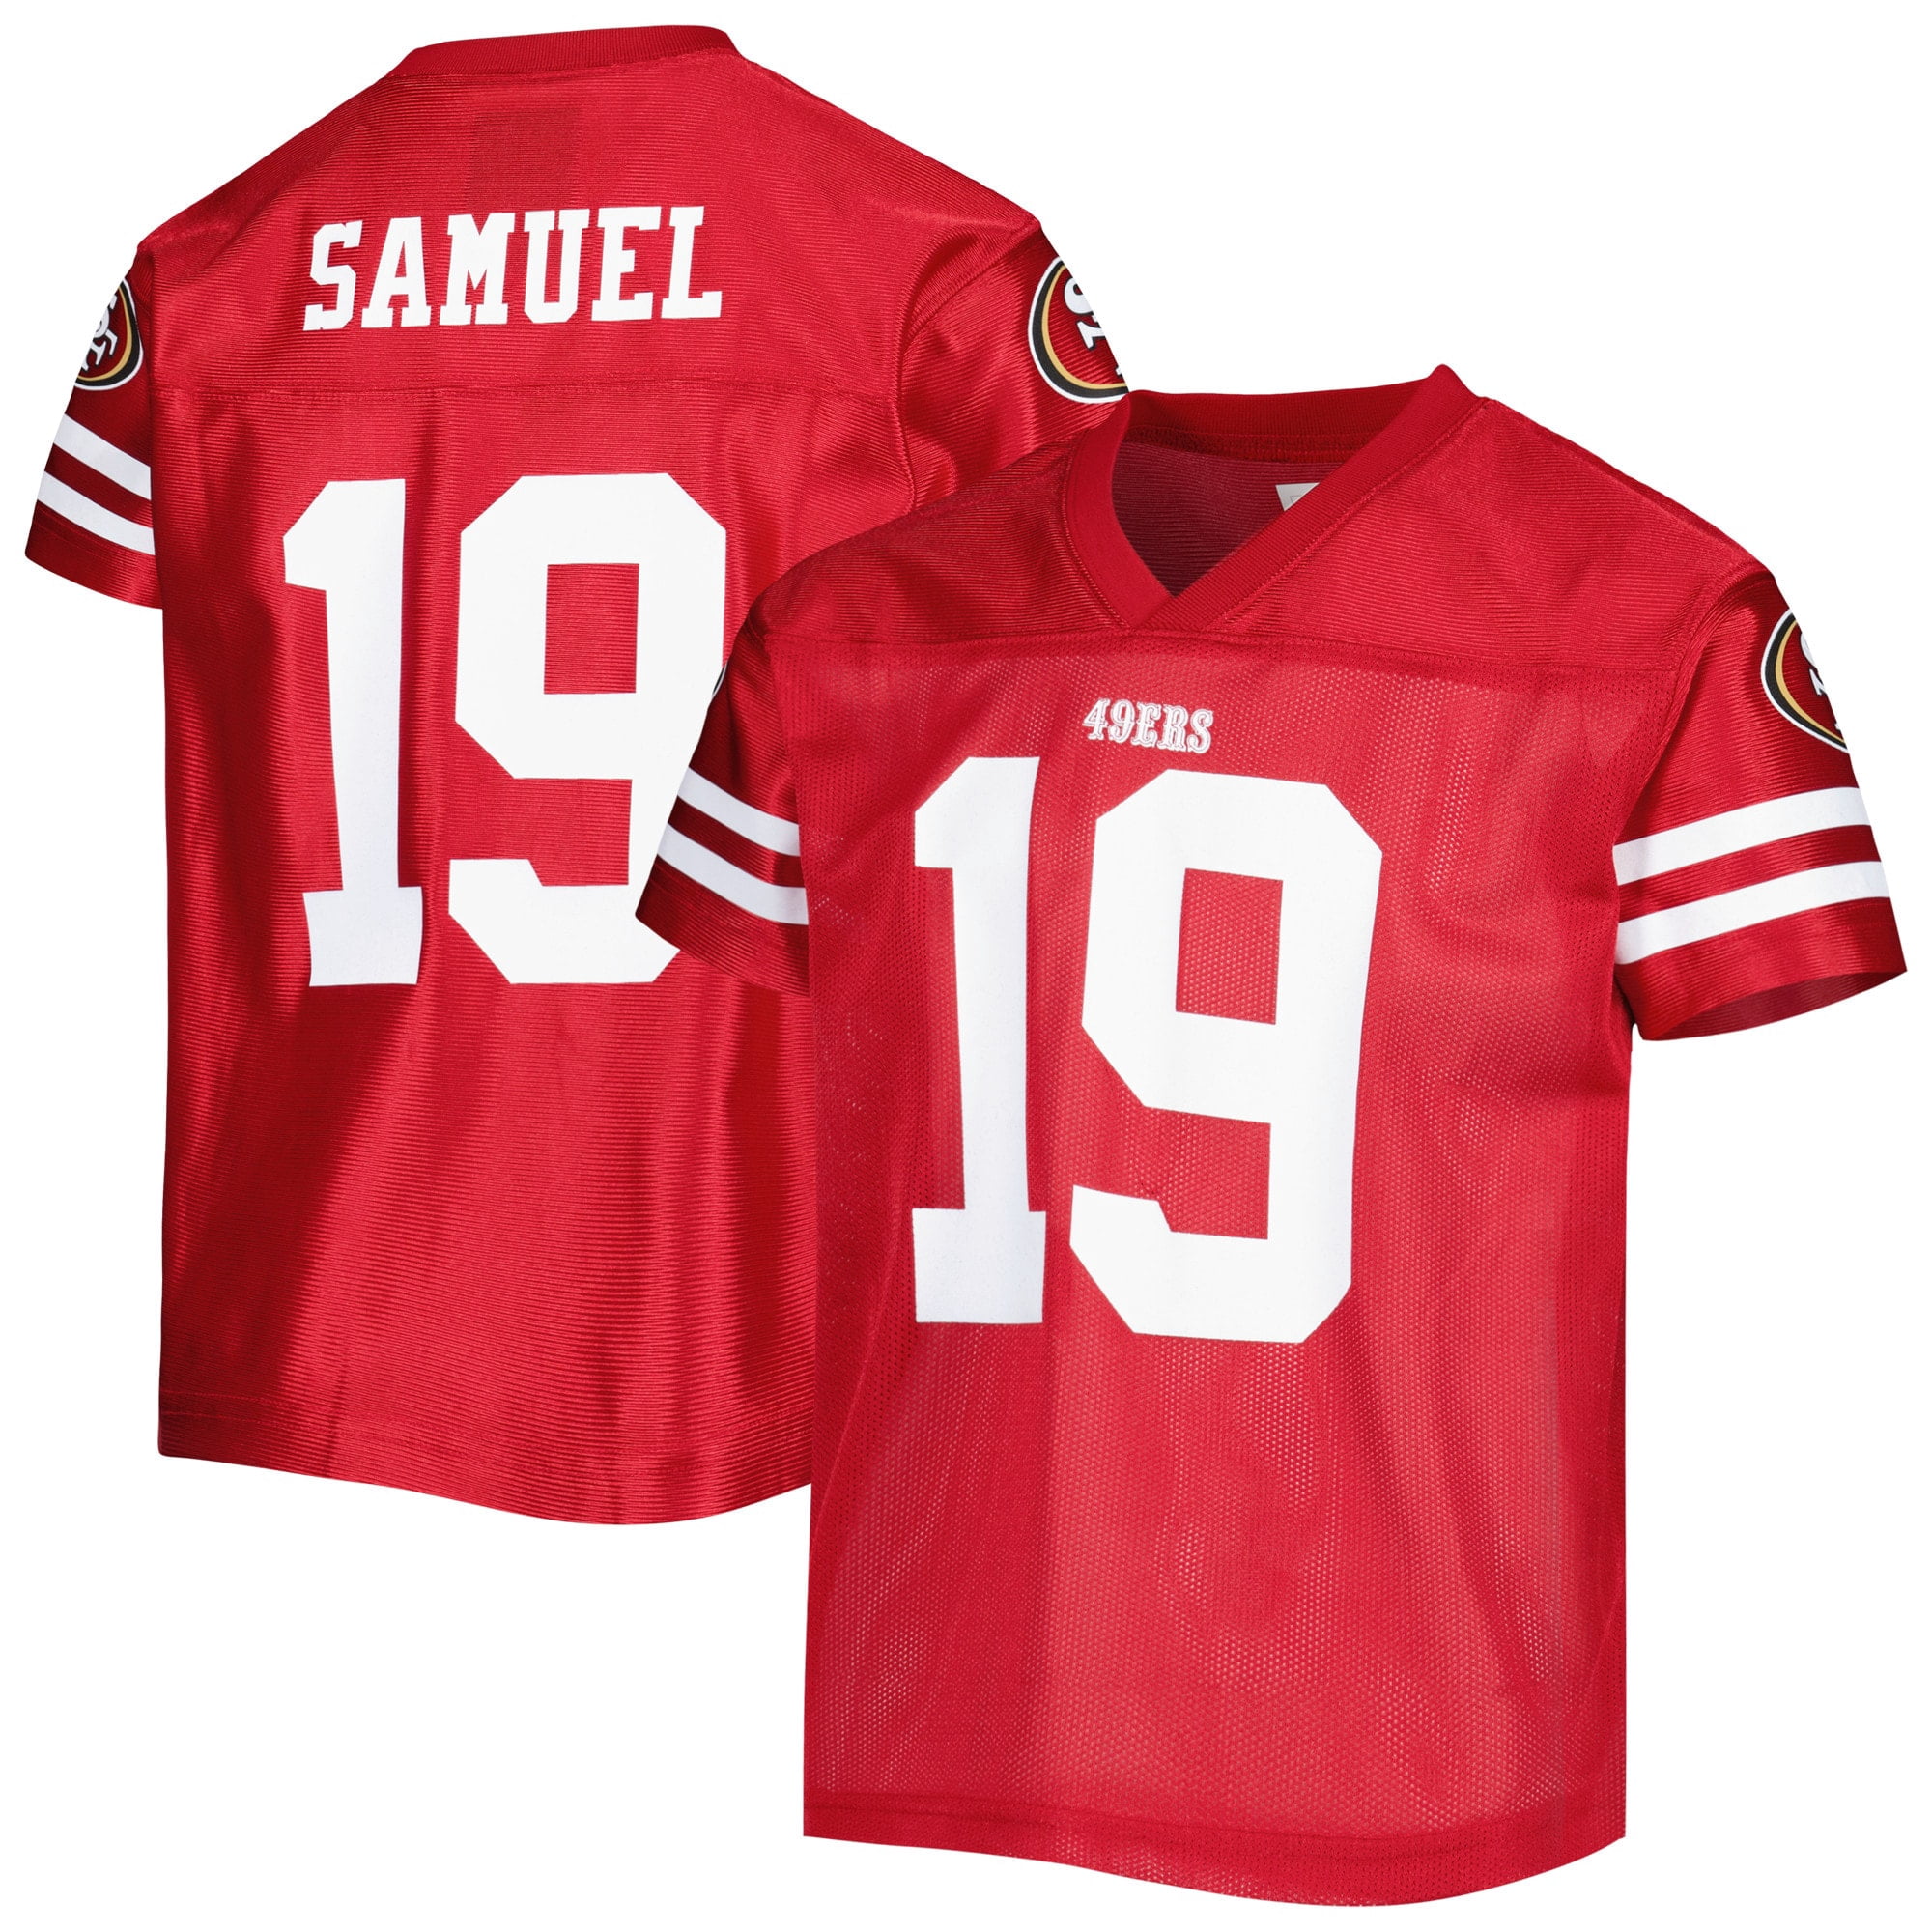 49ers number 19 jersey